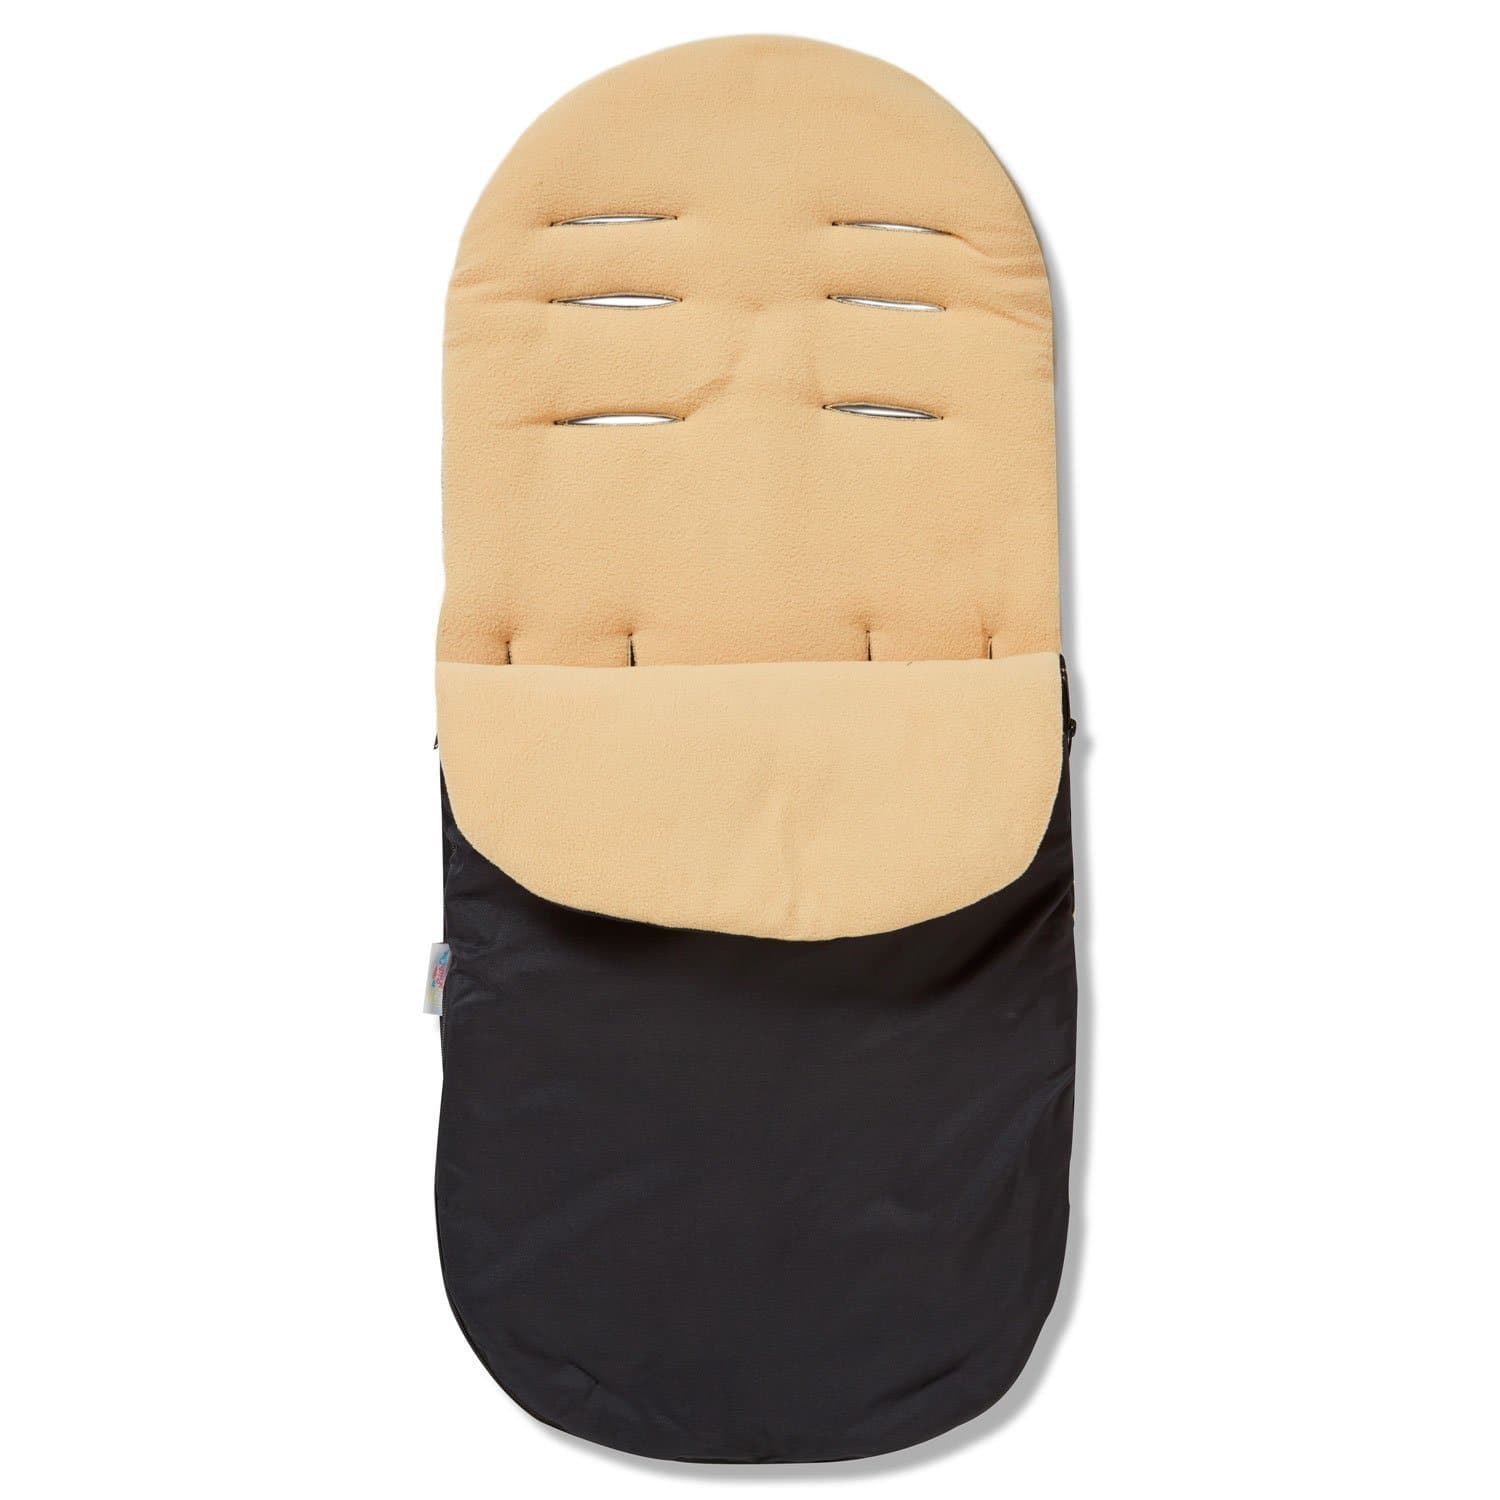 Footmuff / Cosy Toes Compatible with Orbit - Sand / Fits All Models | For Your Little One